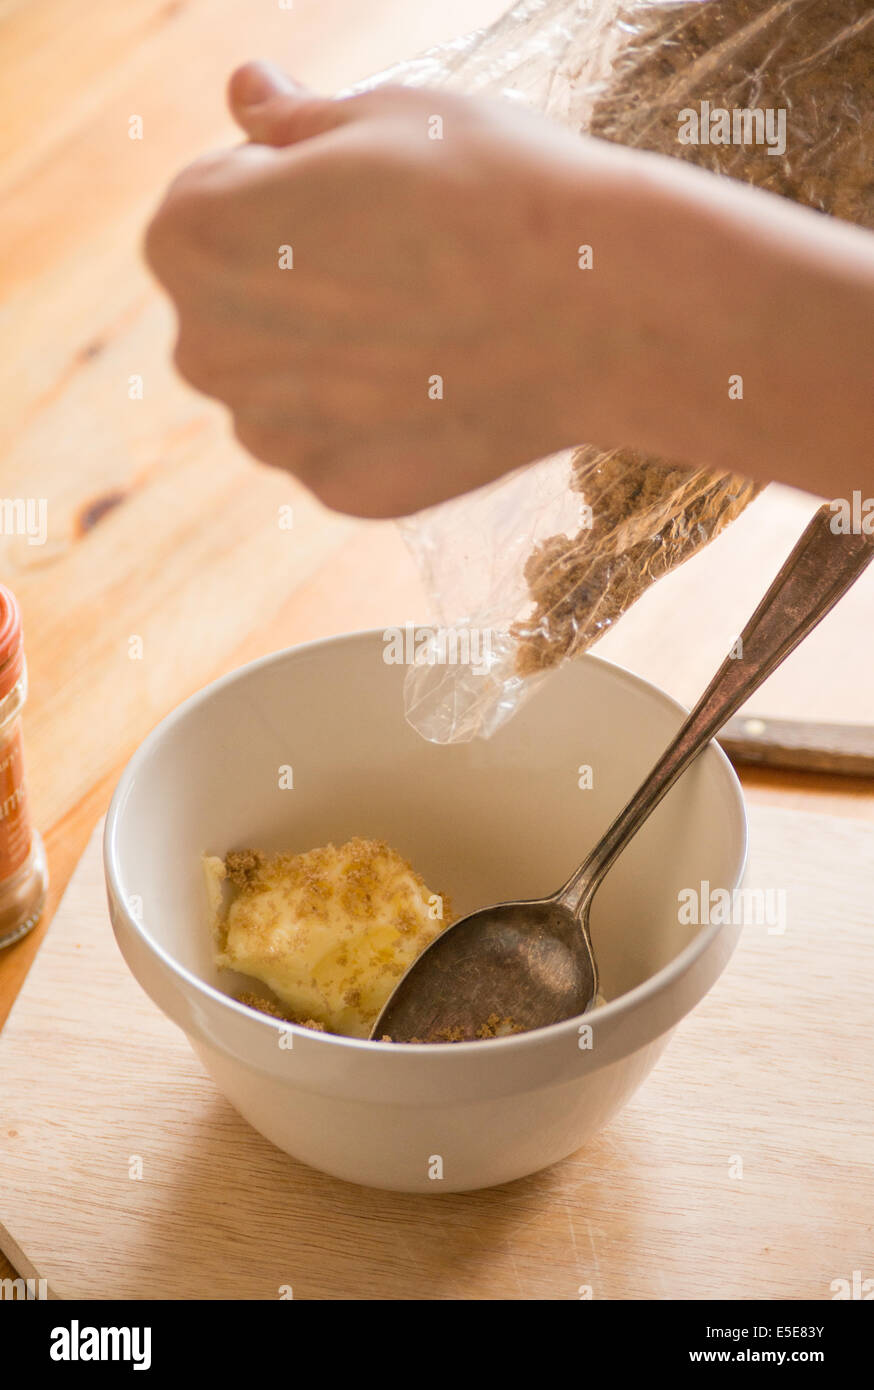 Step by step how to make Cinnamon Toast Stock Photo